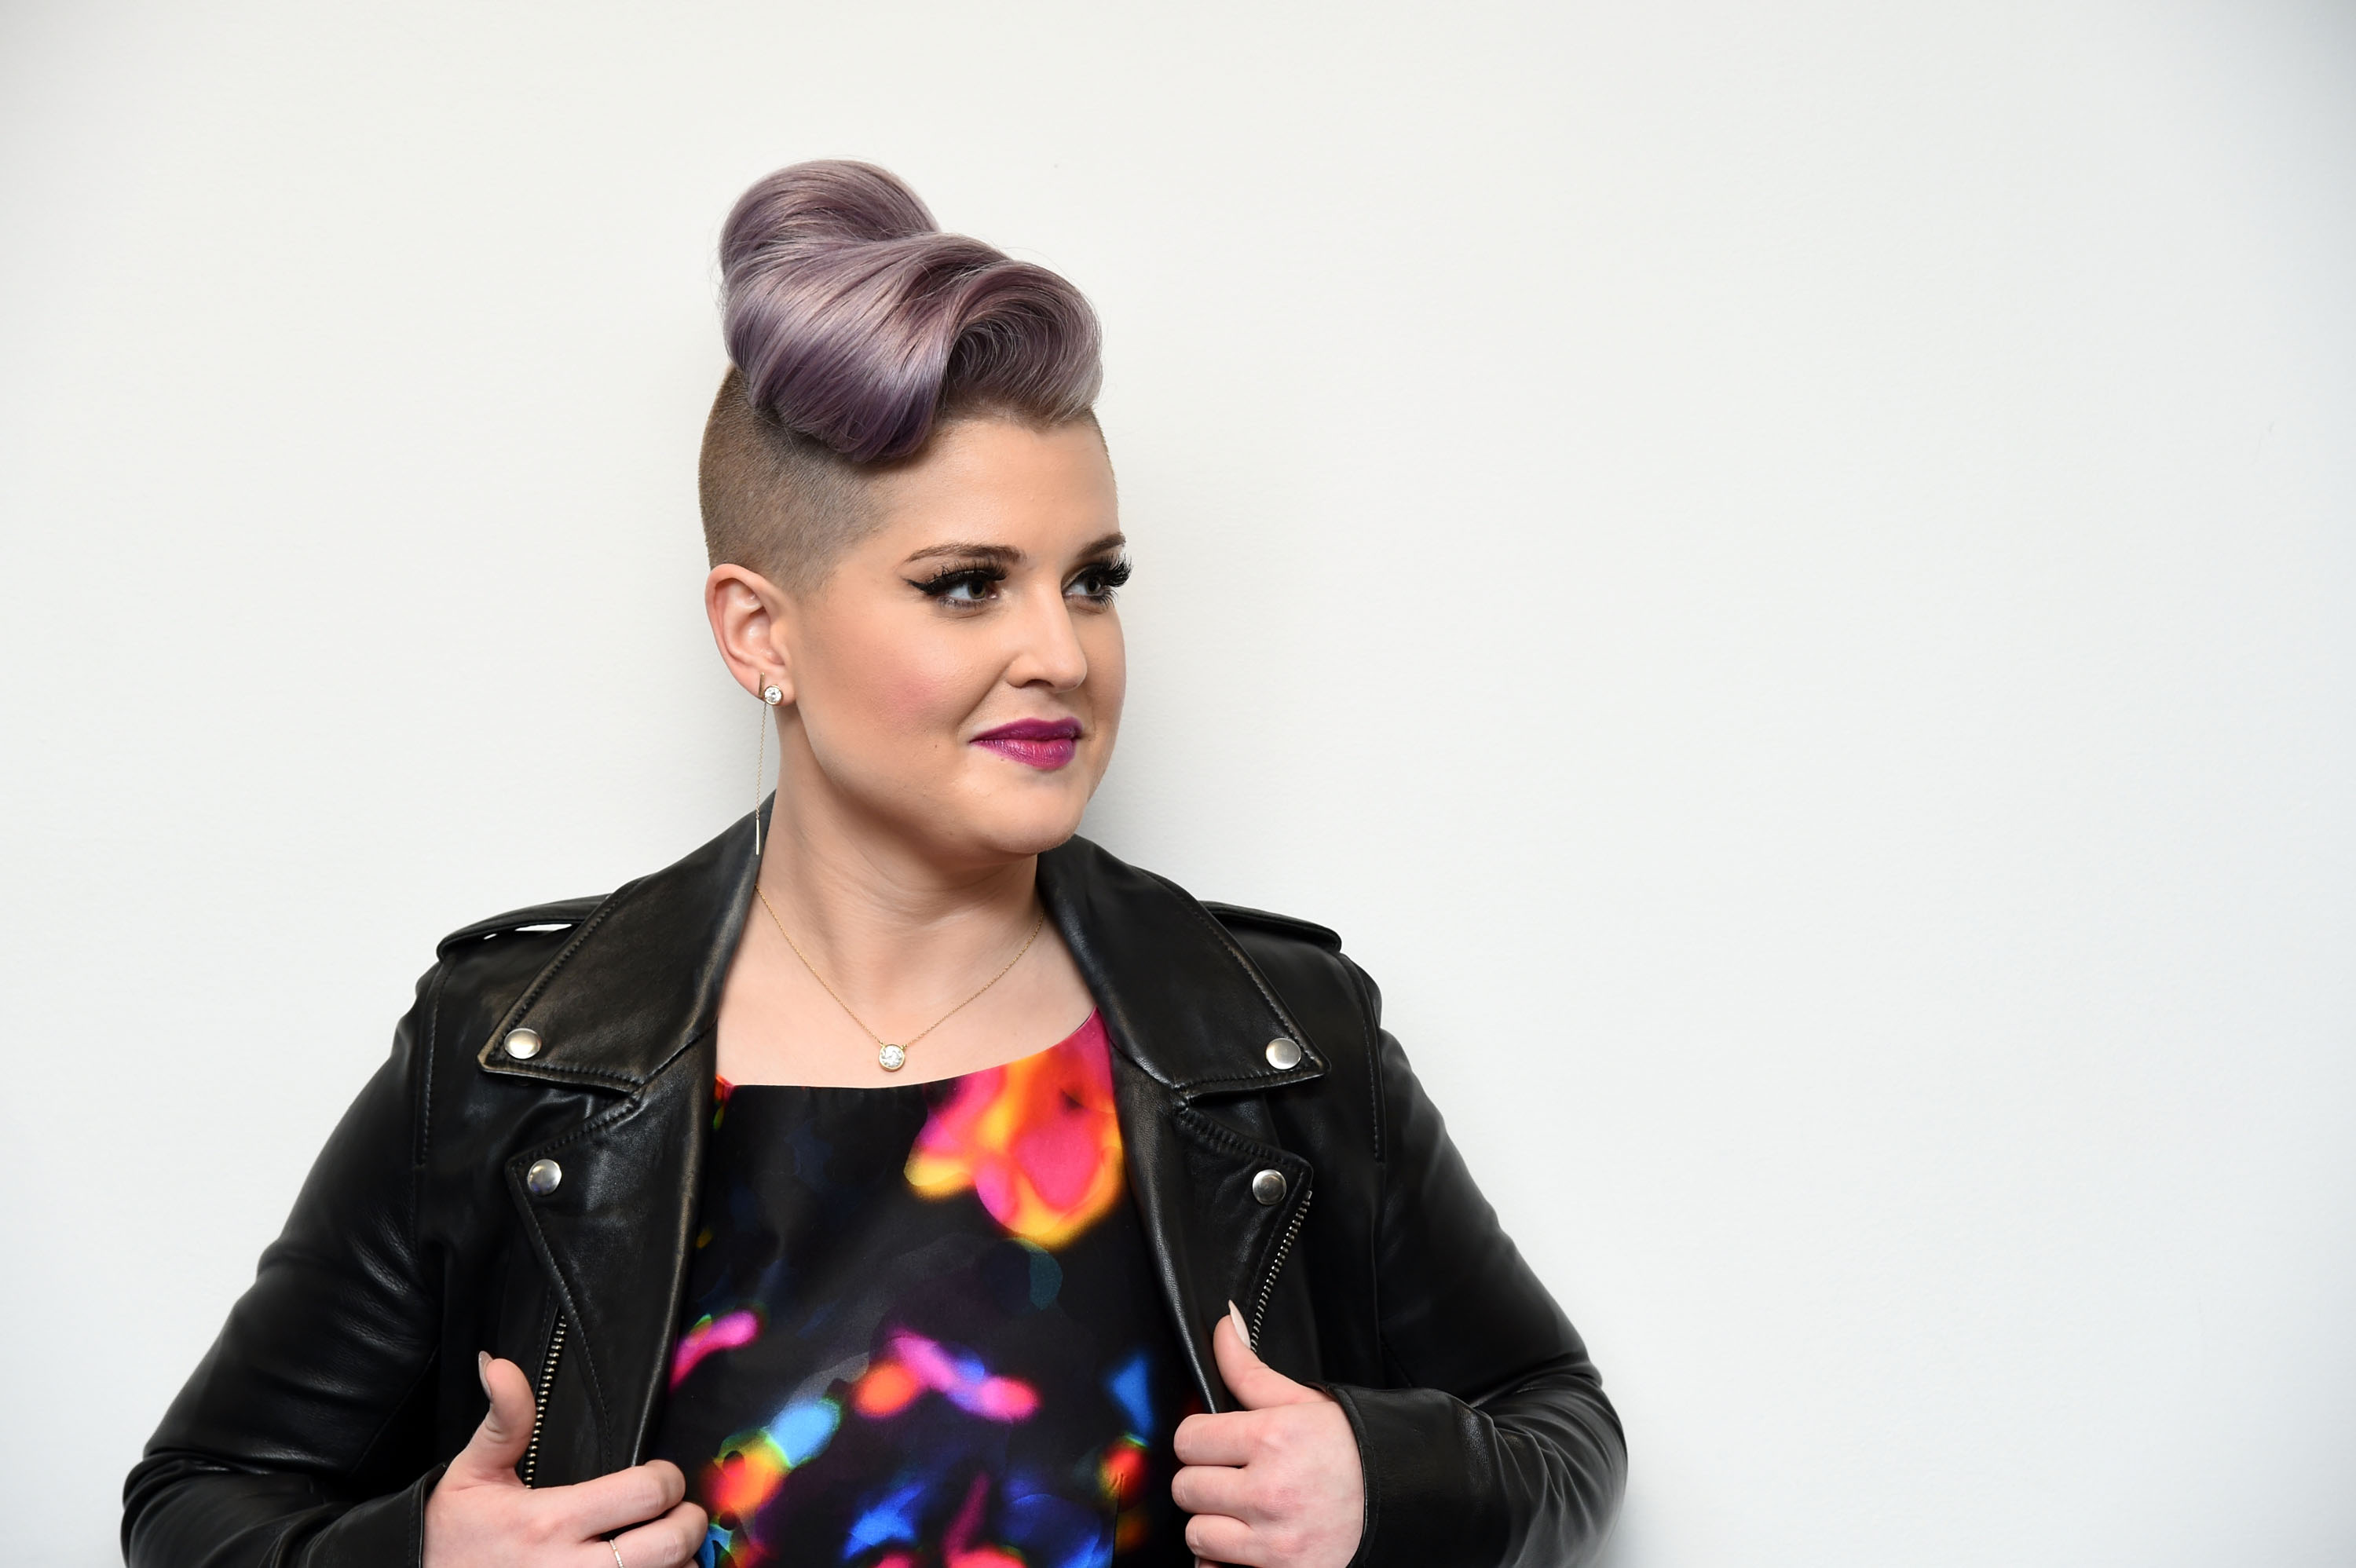 Kelly Osbourne visits the SiriusXM Studios in New York City on November 12, 2015. | Source: Getty Images